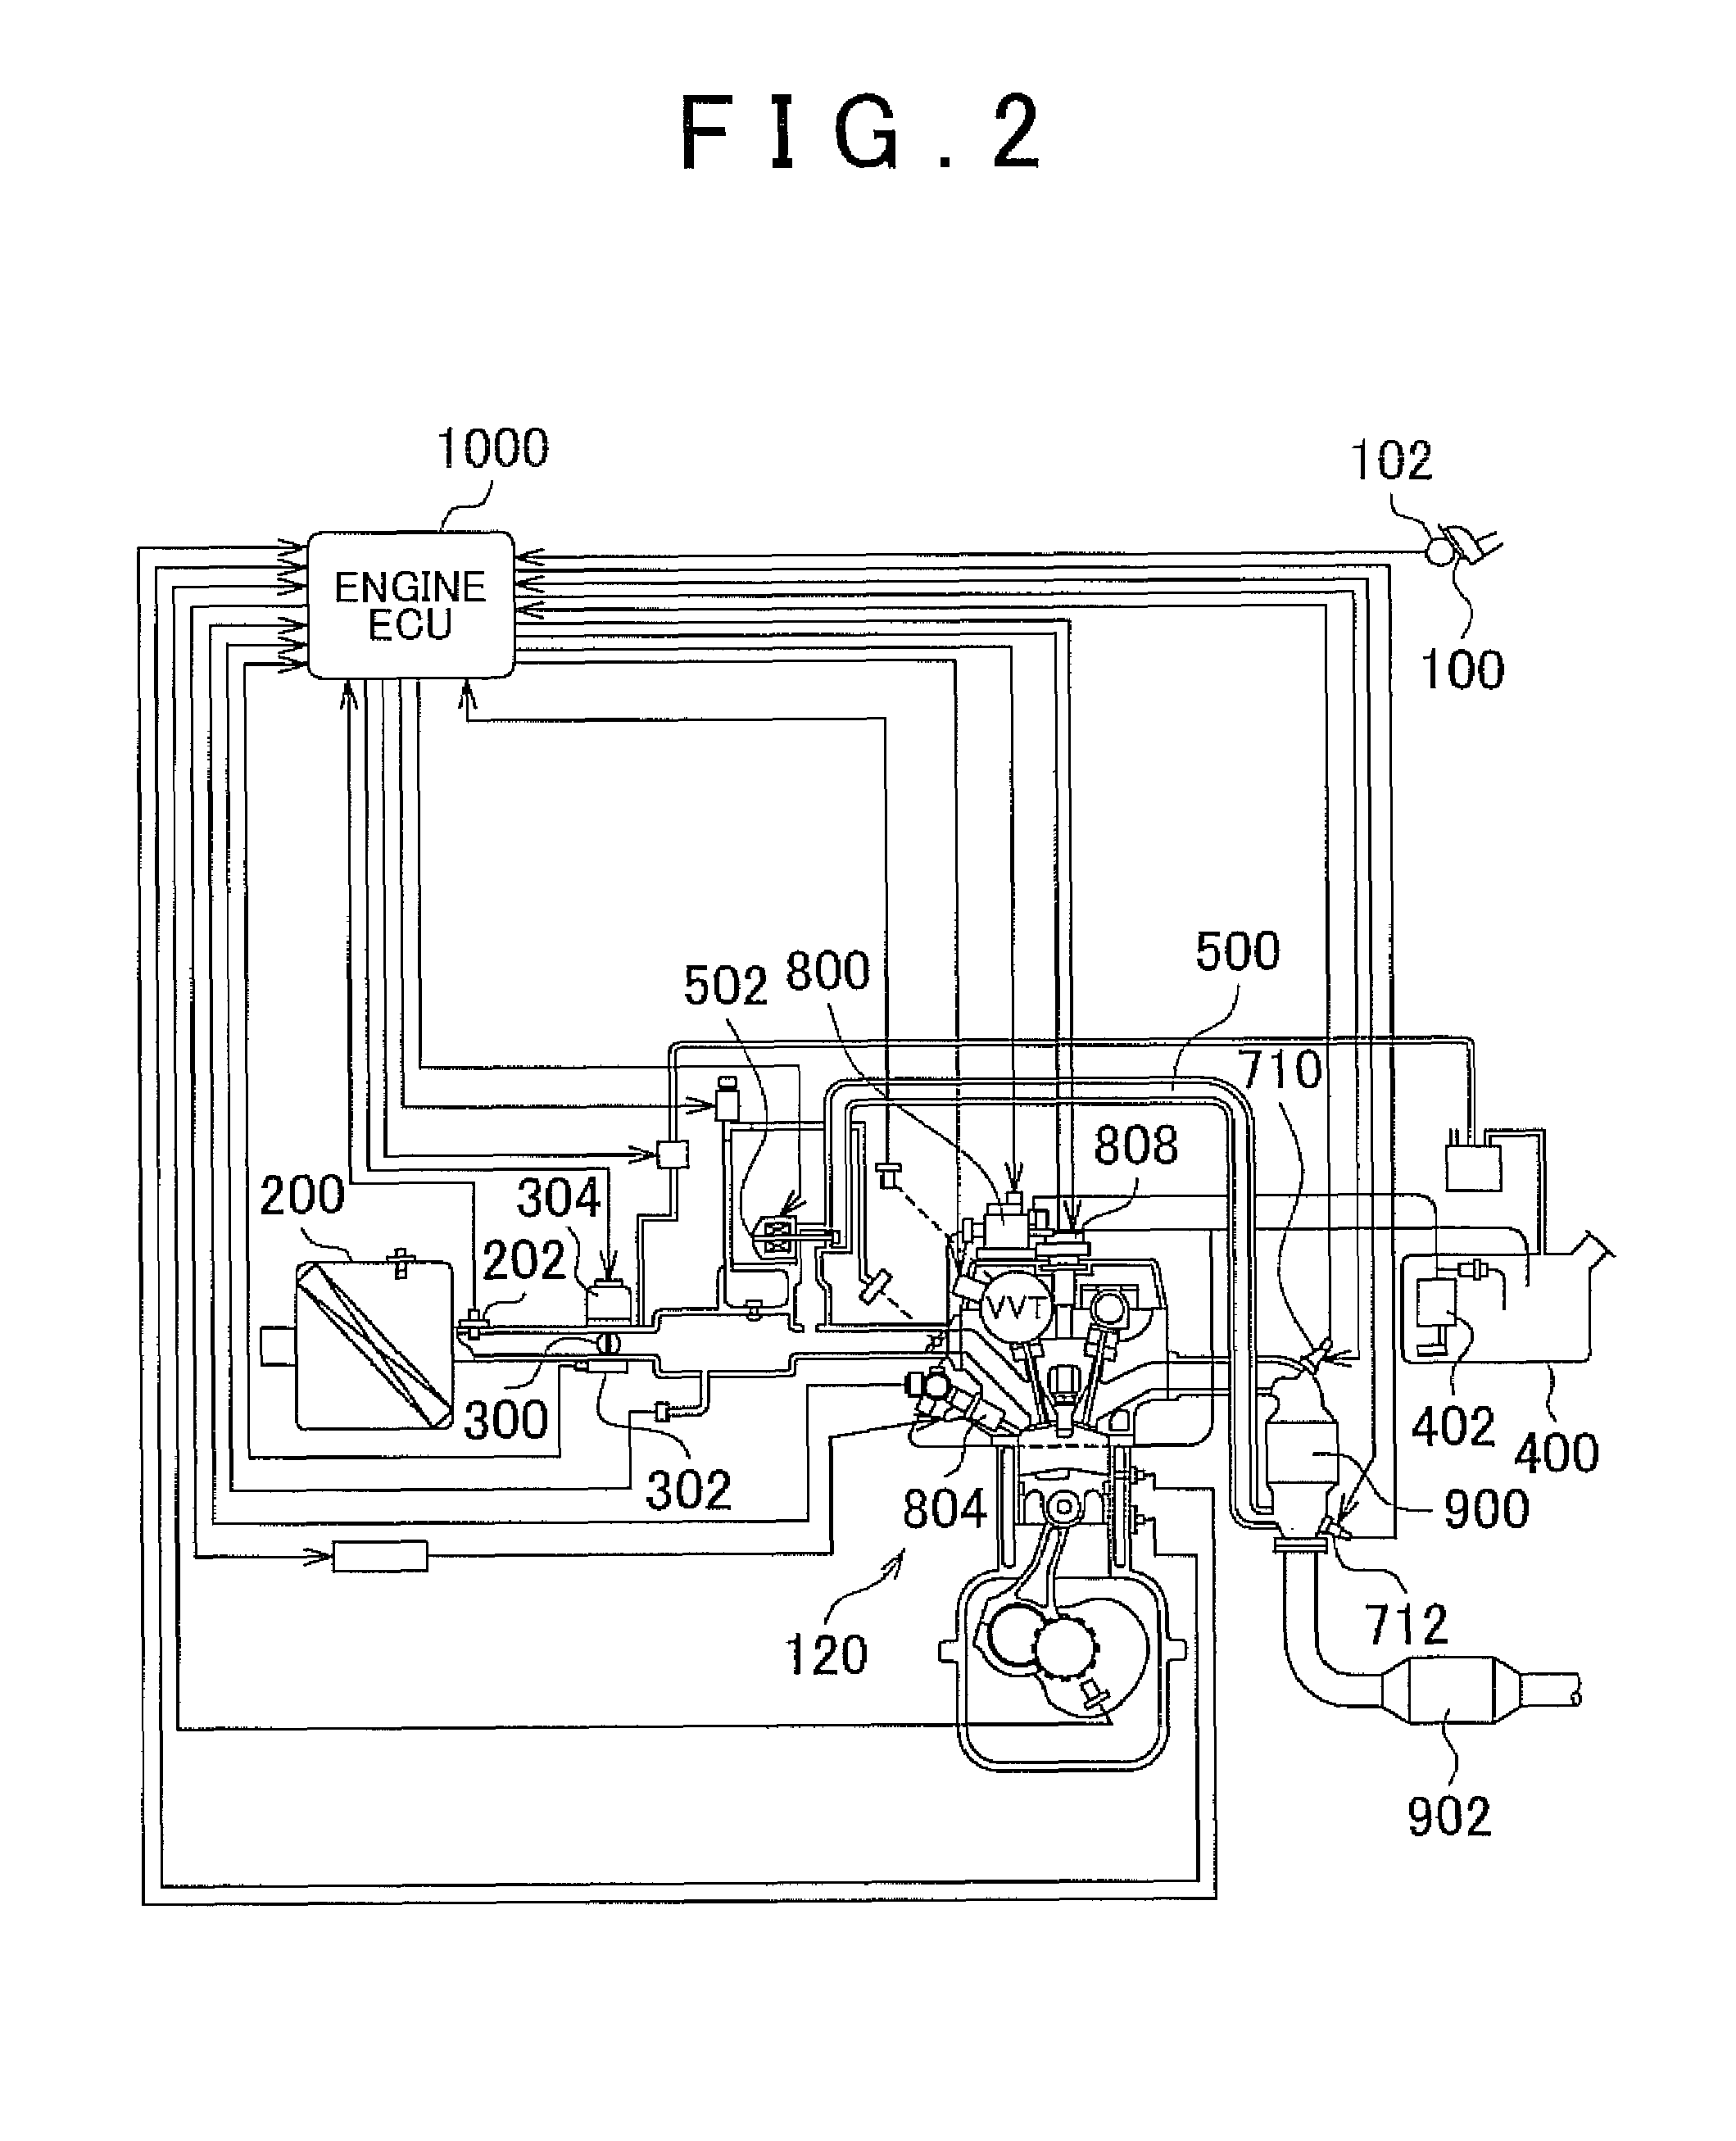 Control apparatus and method for hybrid vehicle